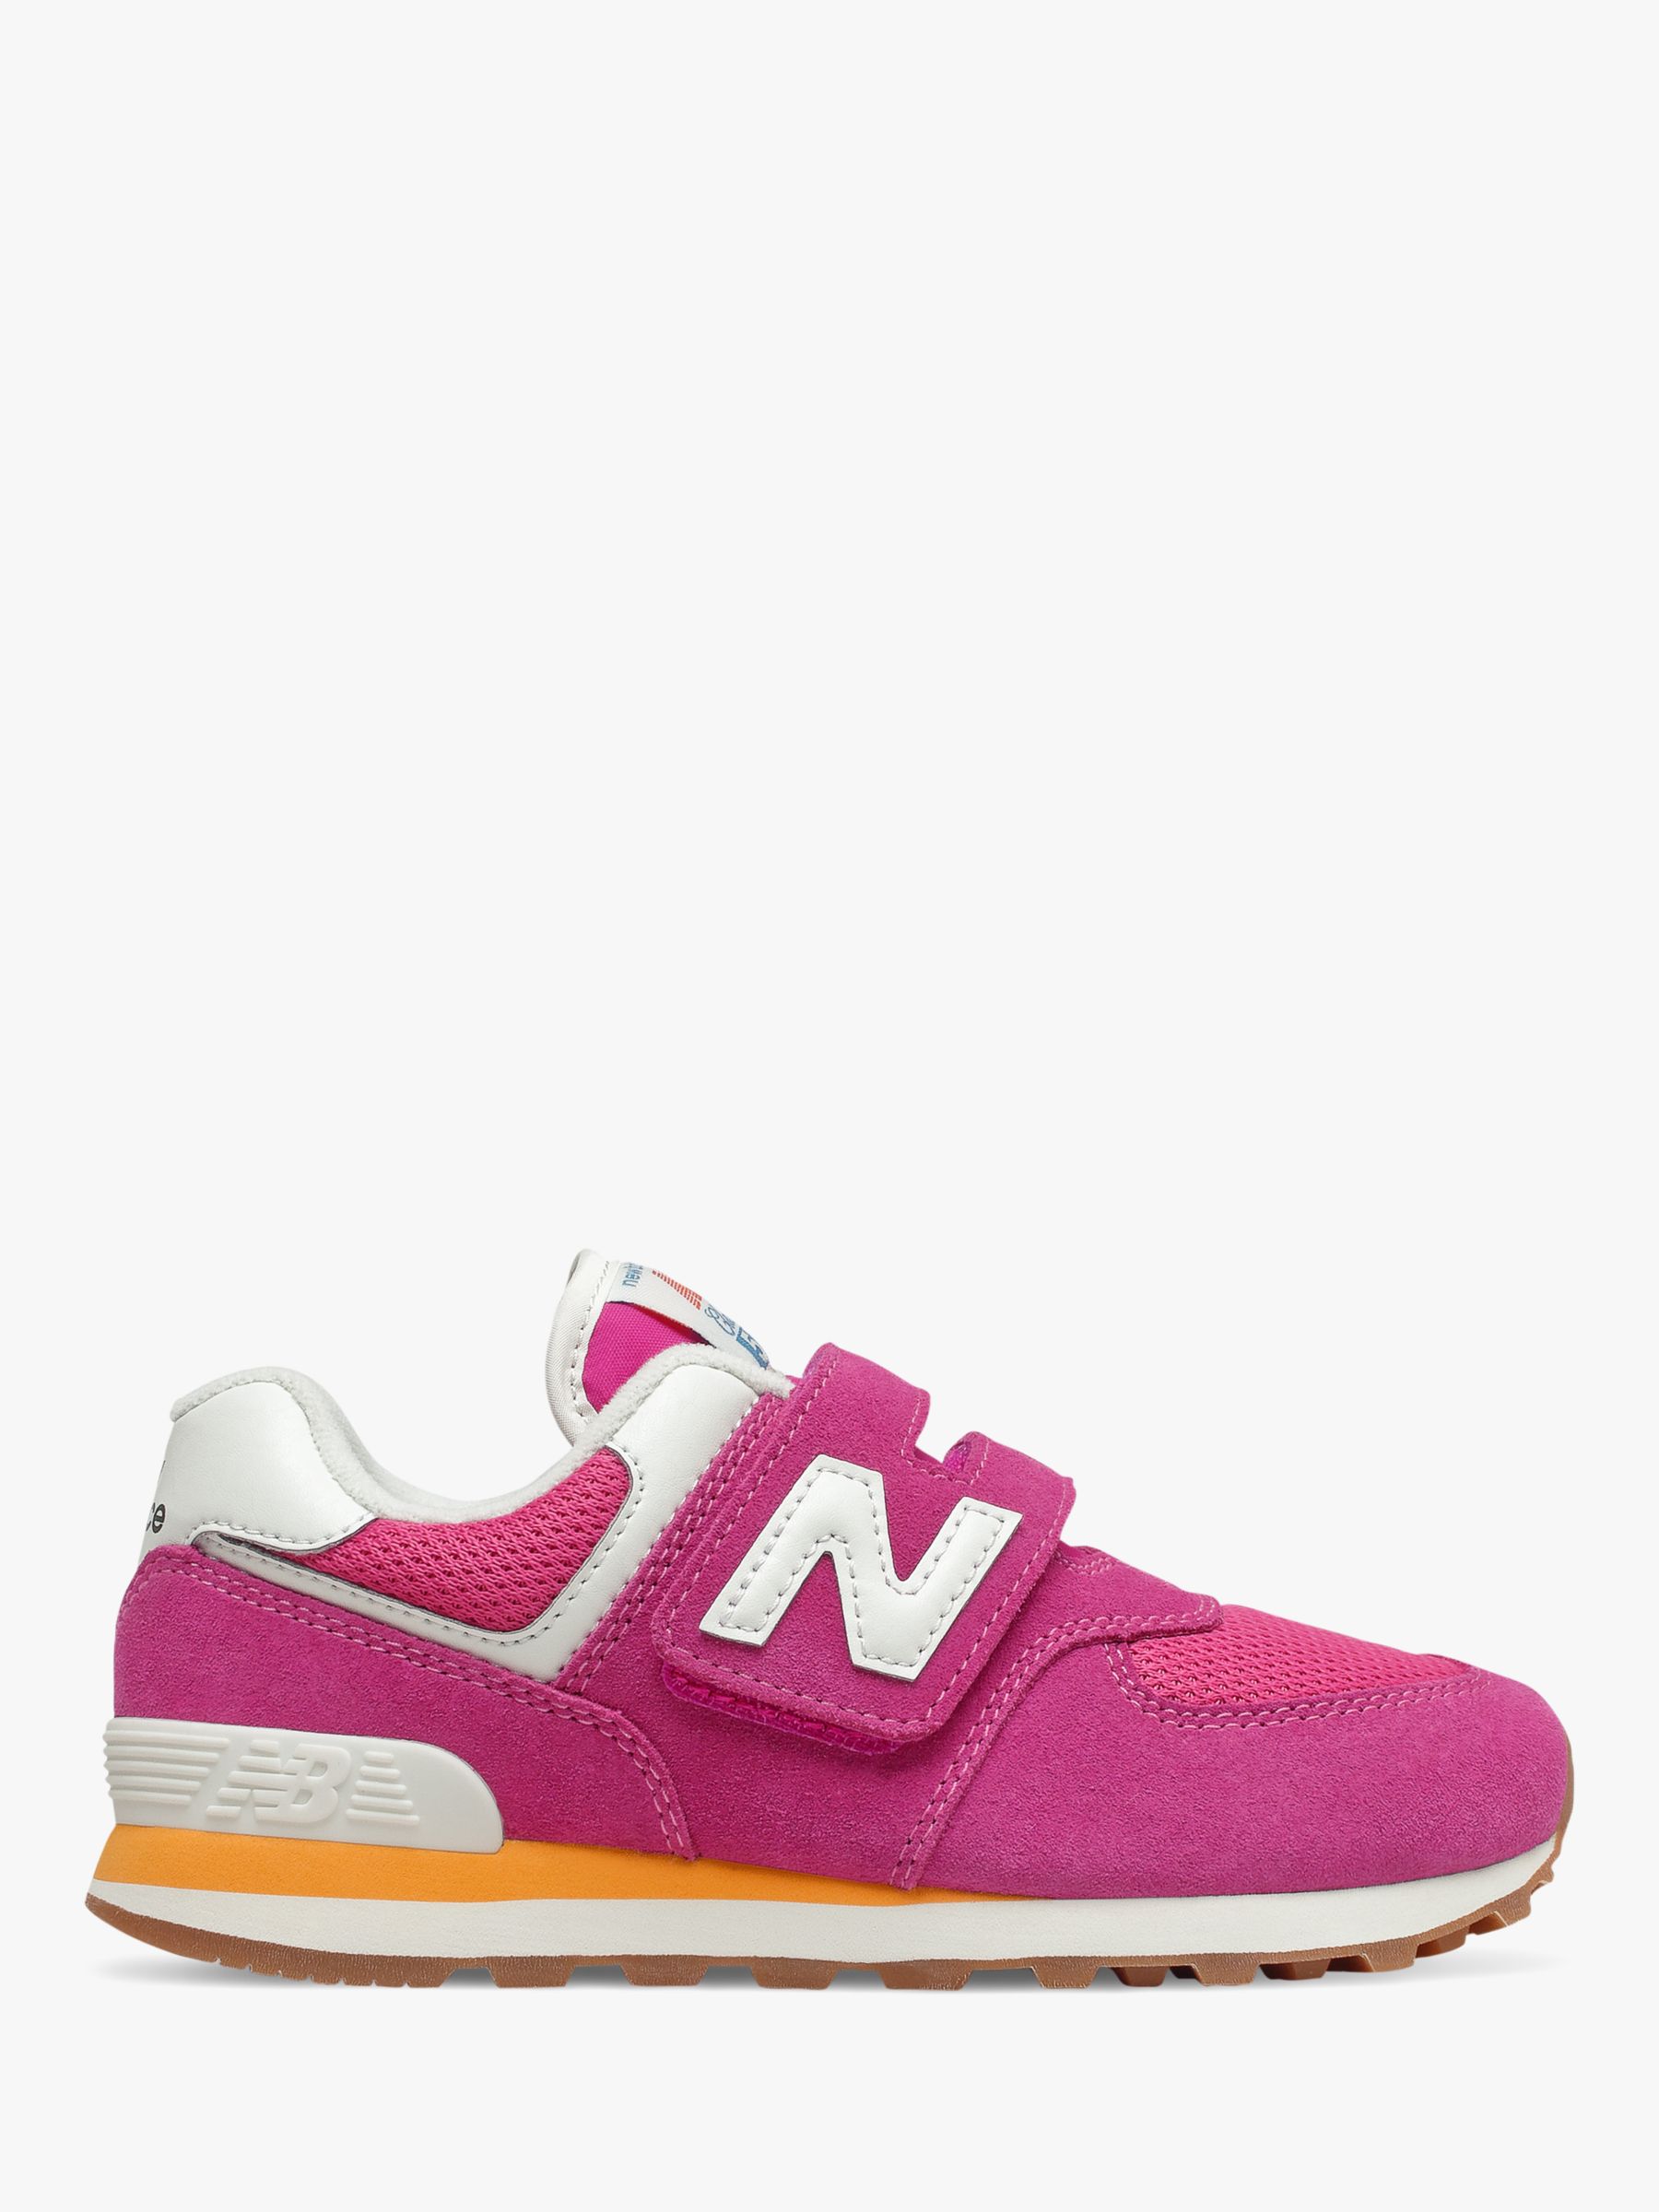 New Balance Children's 574 Suede Riptape Trainers